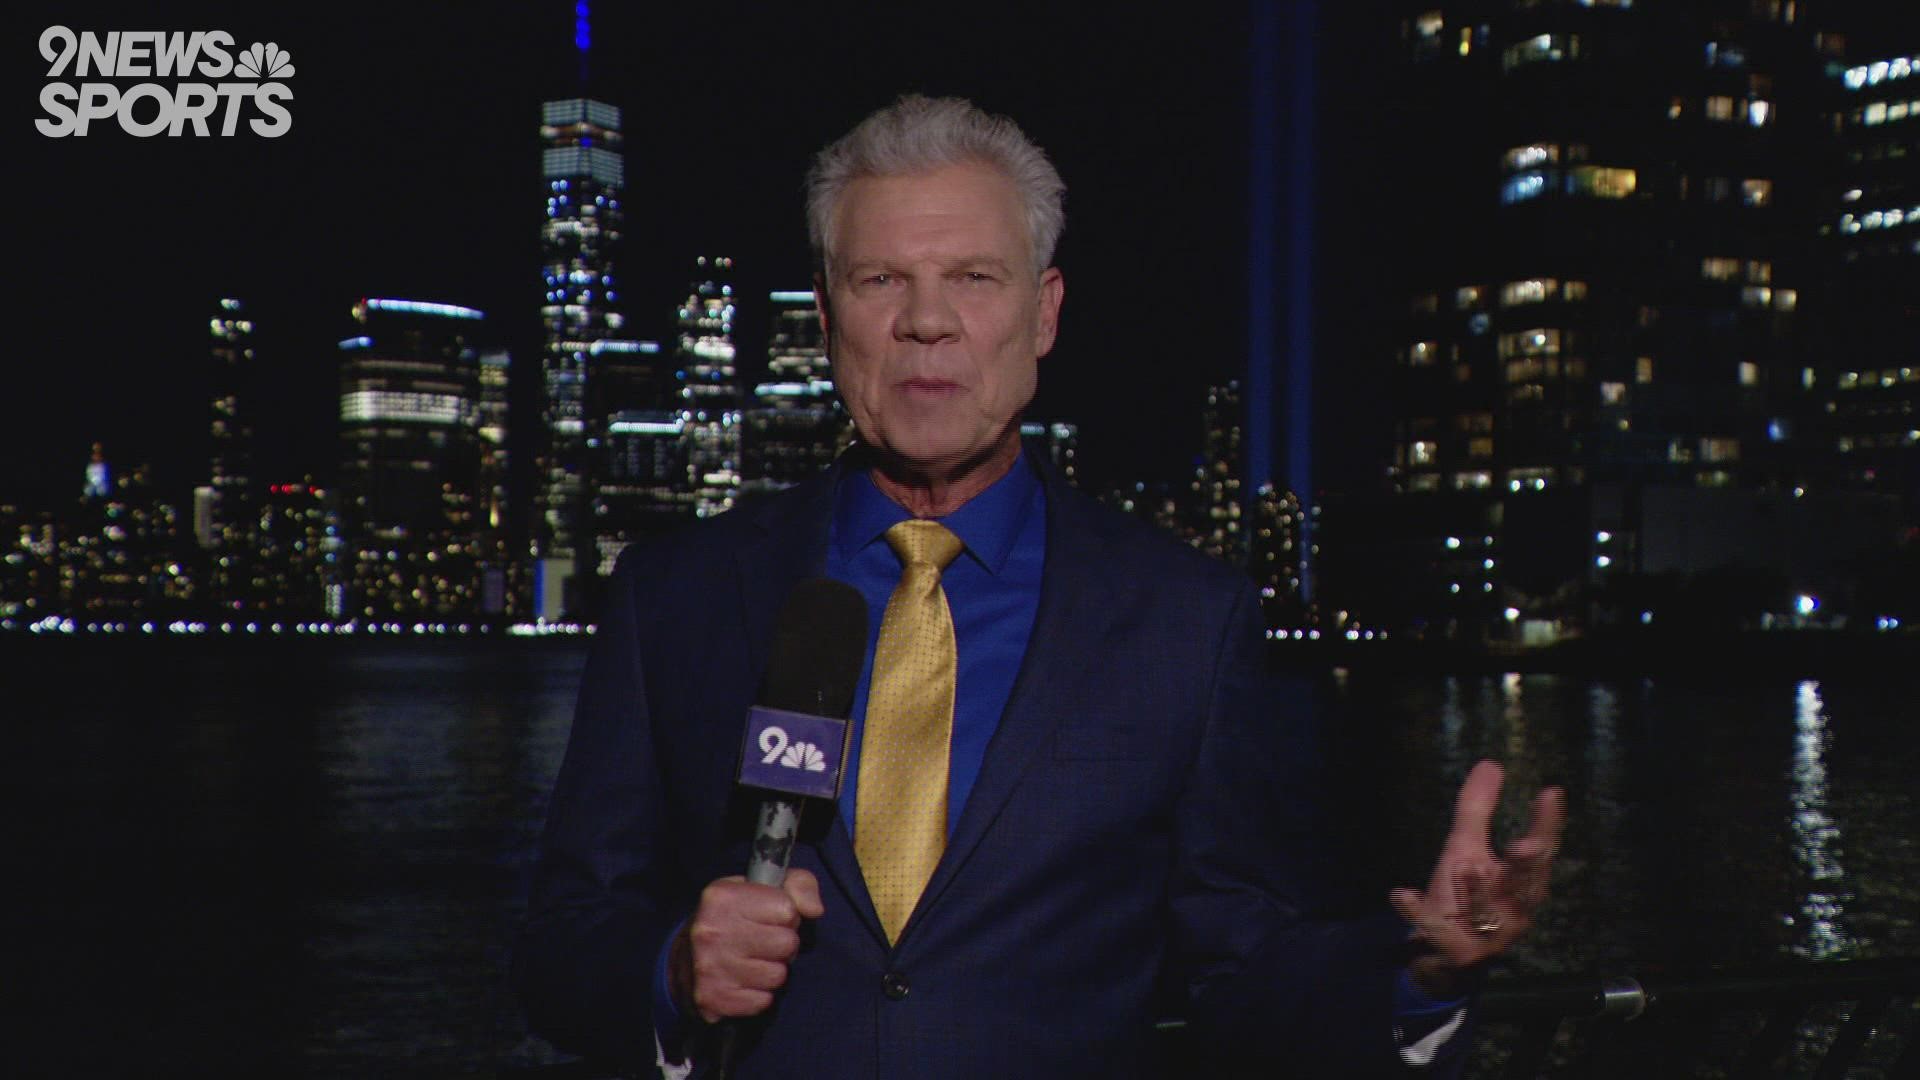 Mike Klis reports from in front of the Freedom Tower on the night of the 20th anniversary of the Sept. 11 attacks.